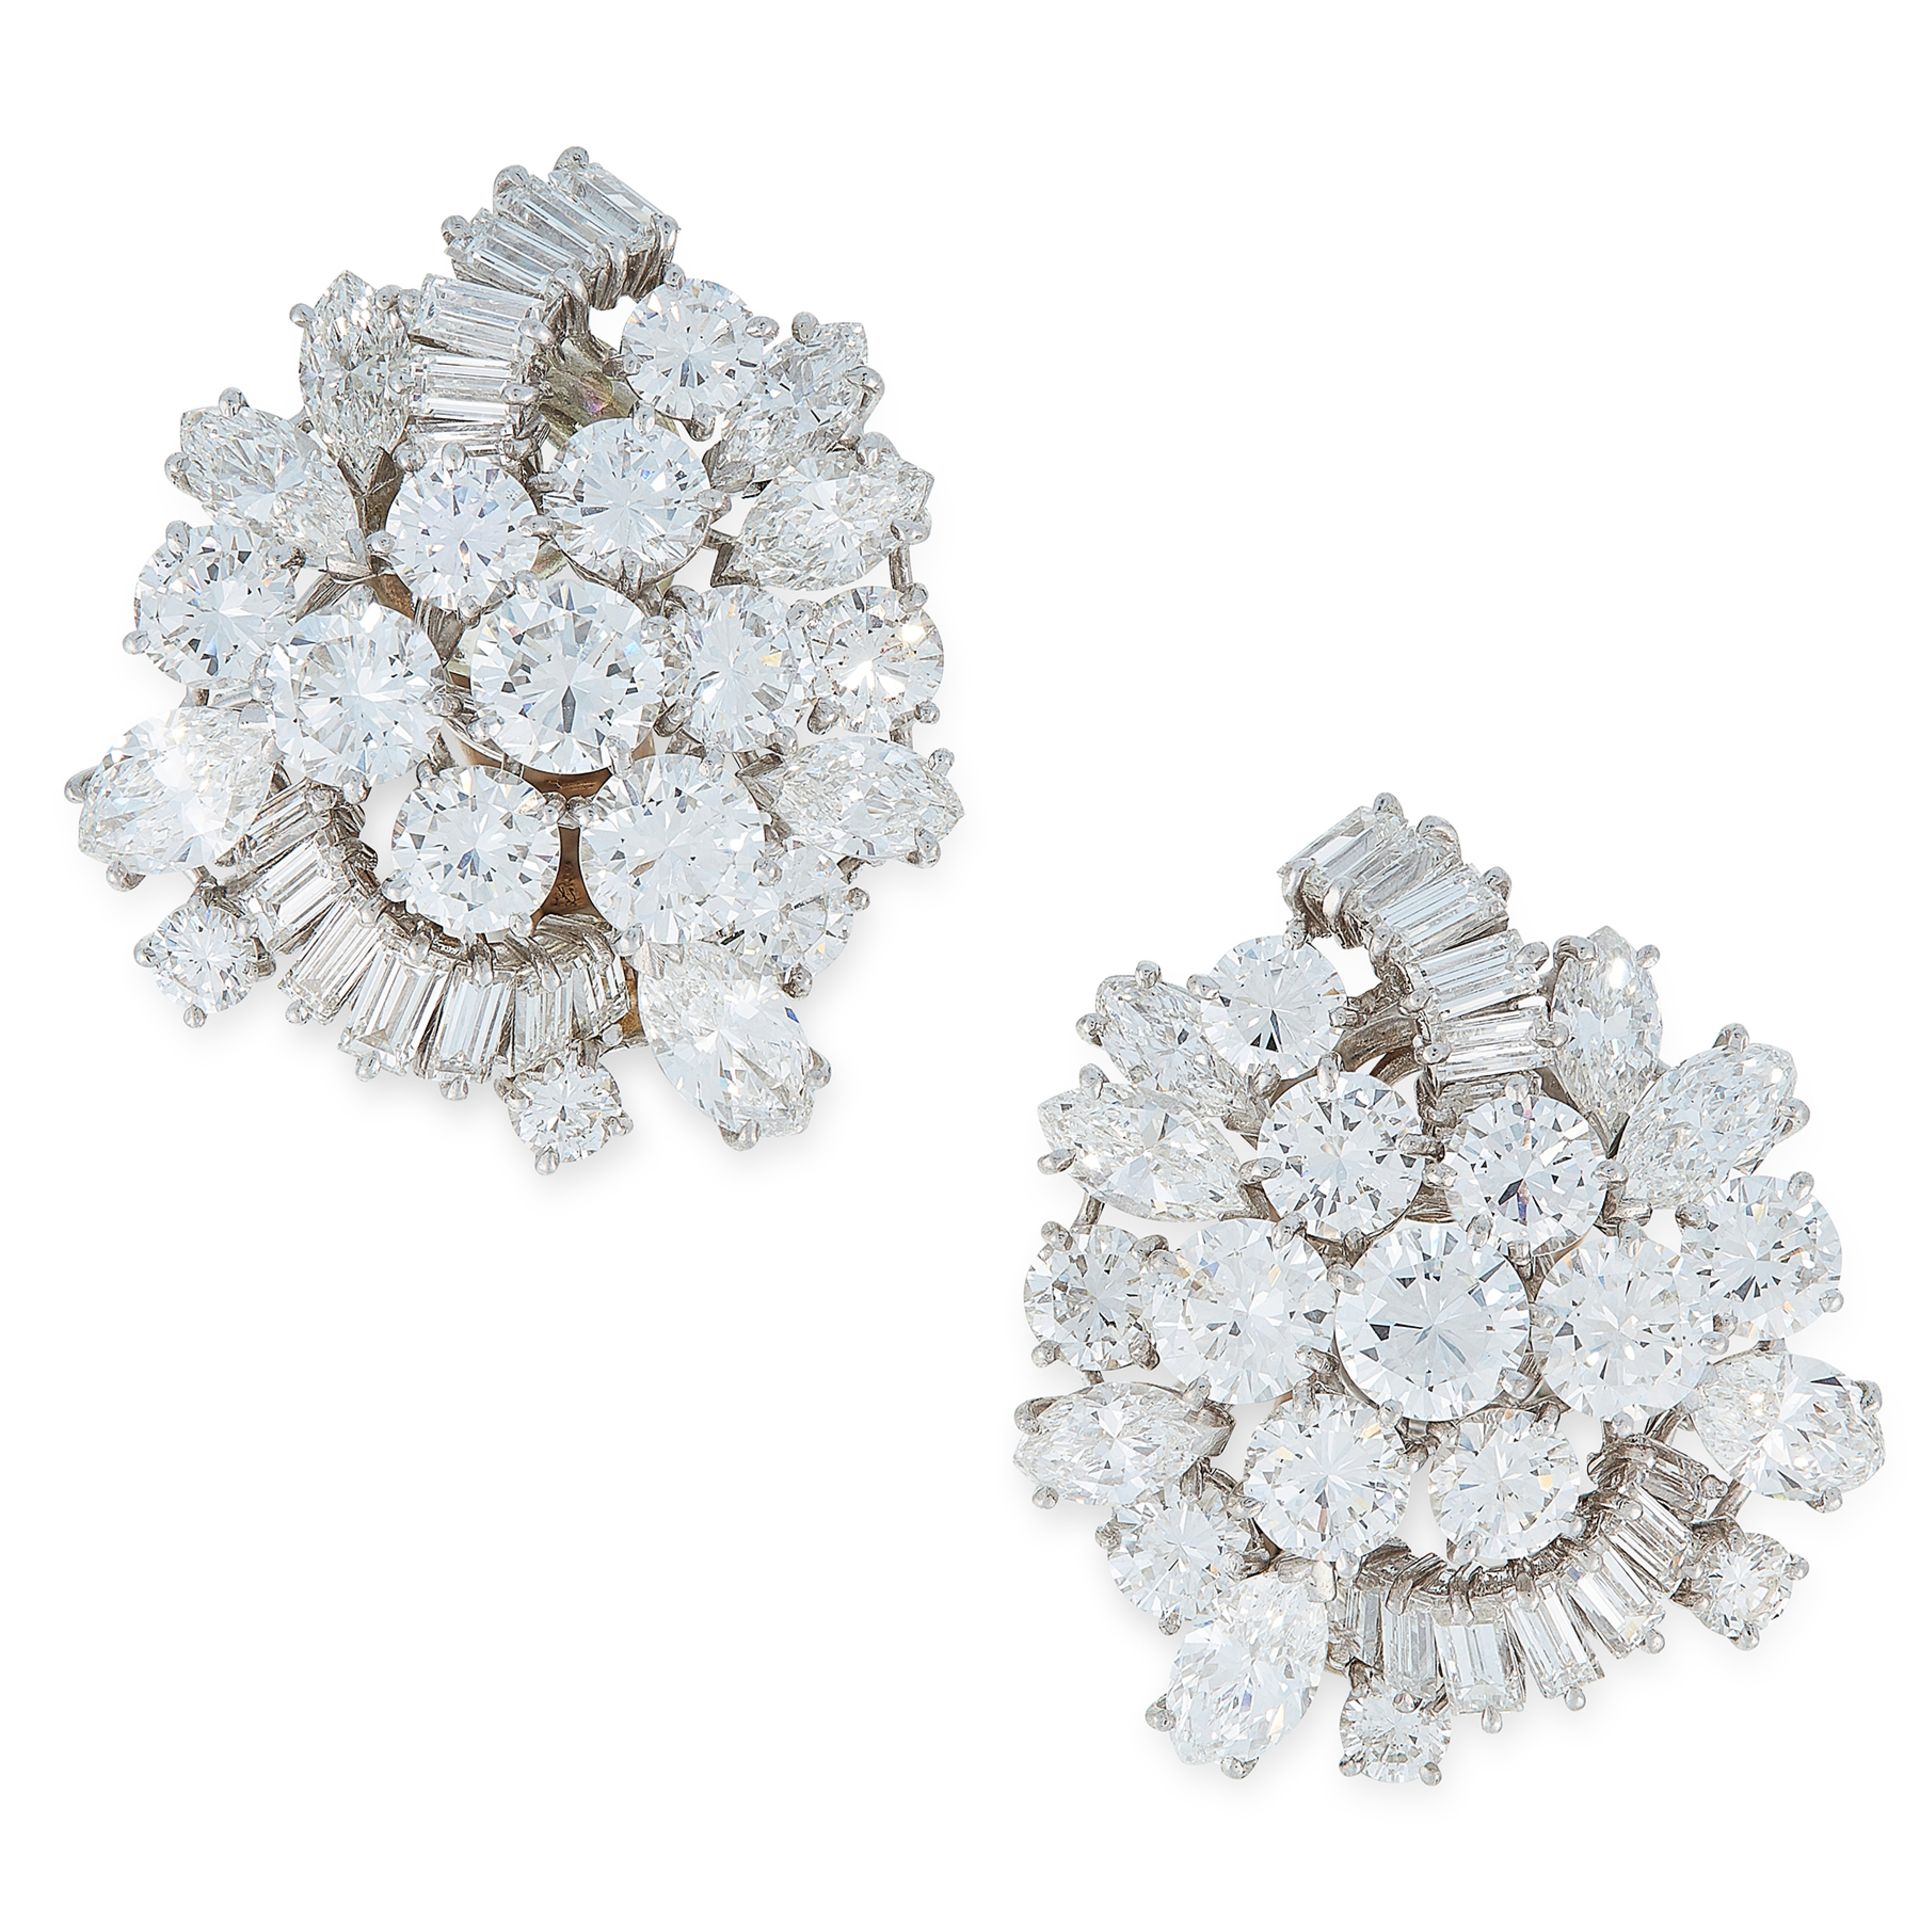 A PAIR OF VINTAGE DIAMOND CLIP EARRINGS in platinum and 18ct white gold, each designed as a